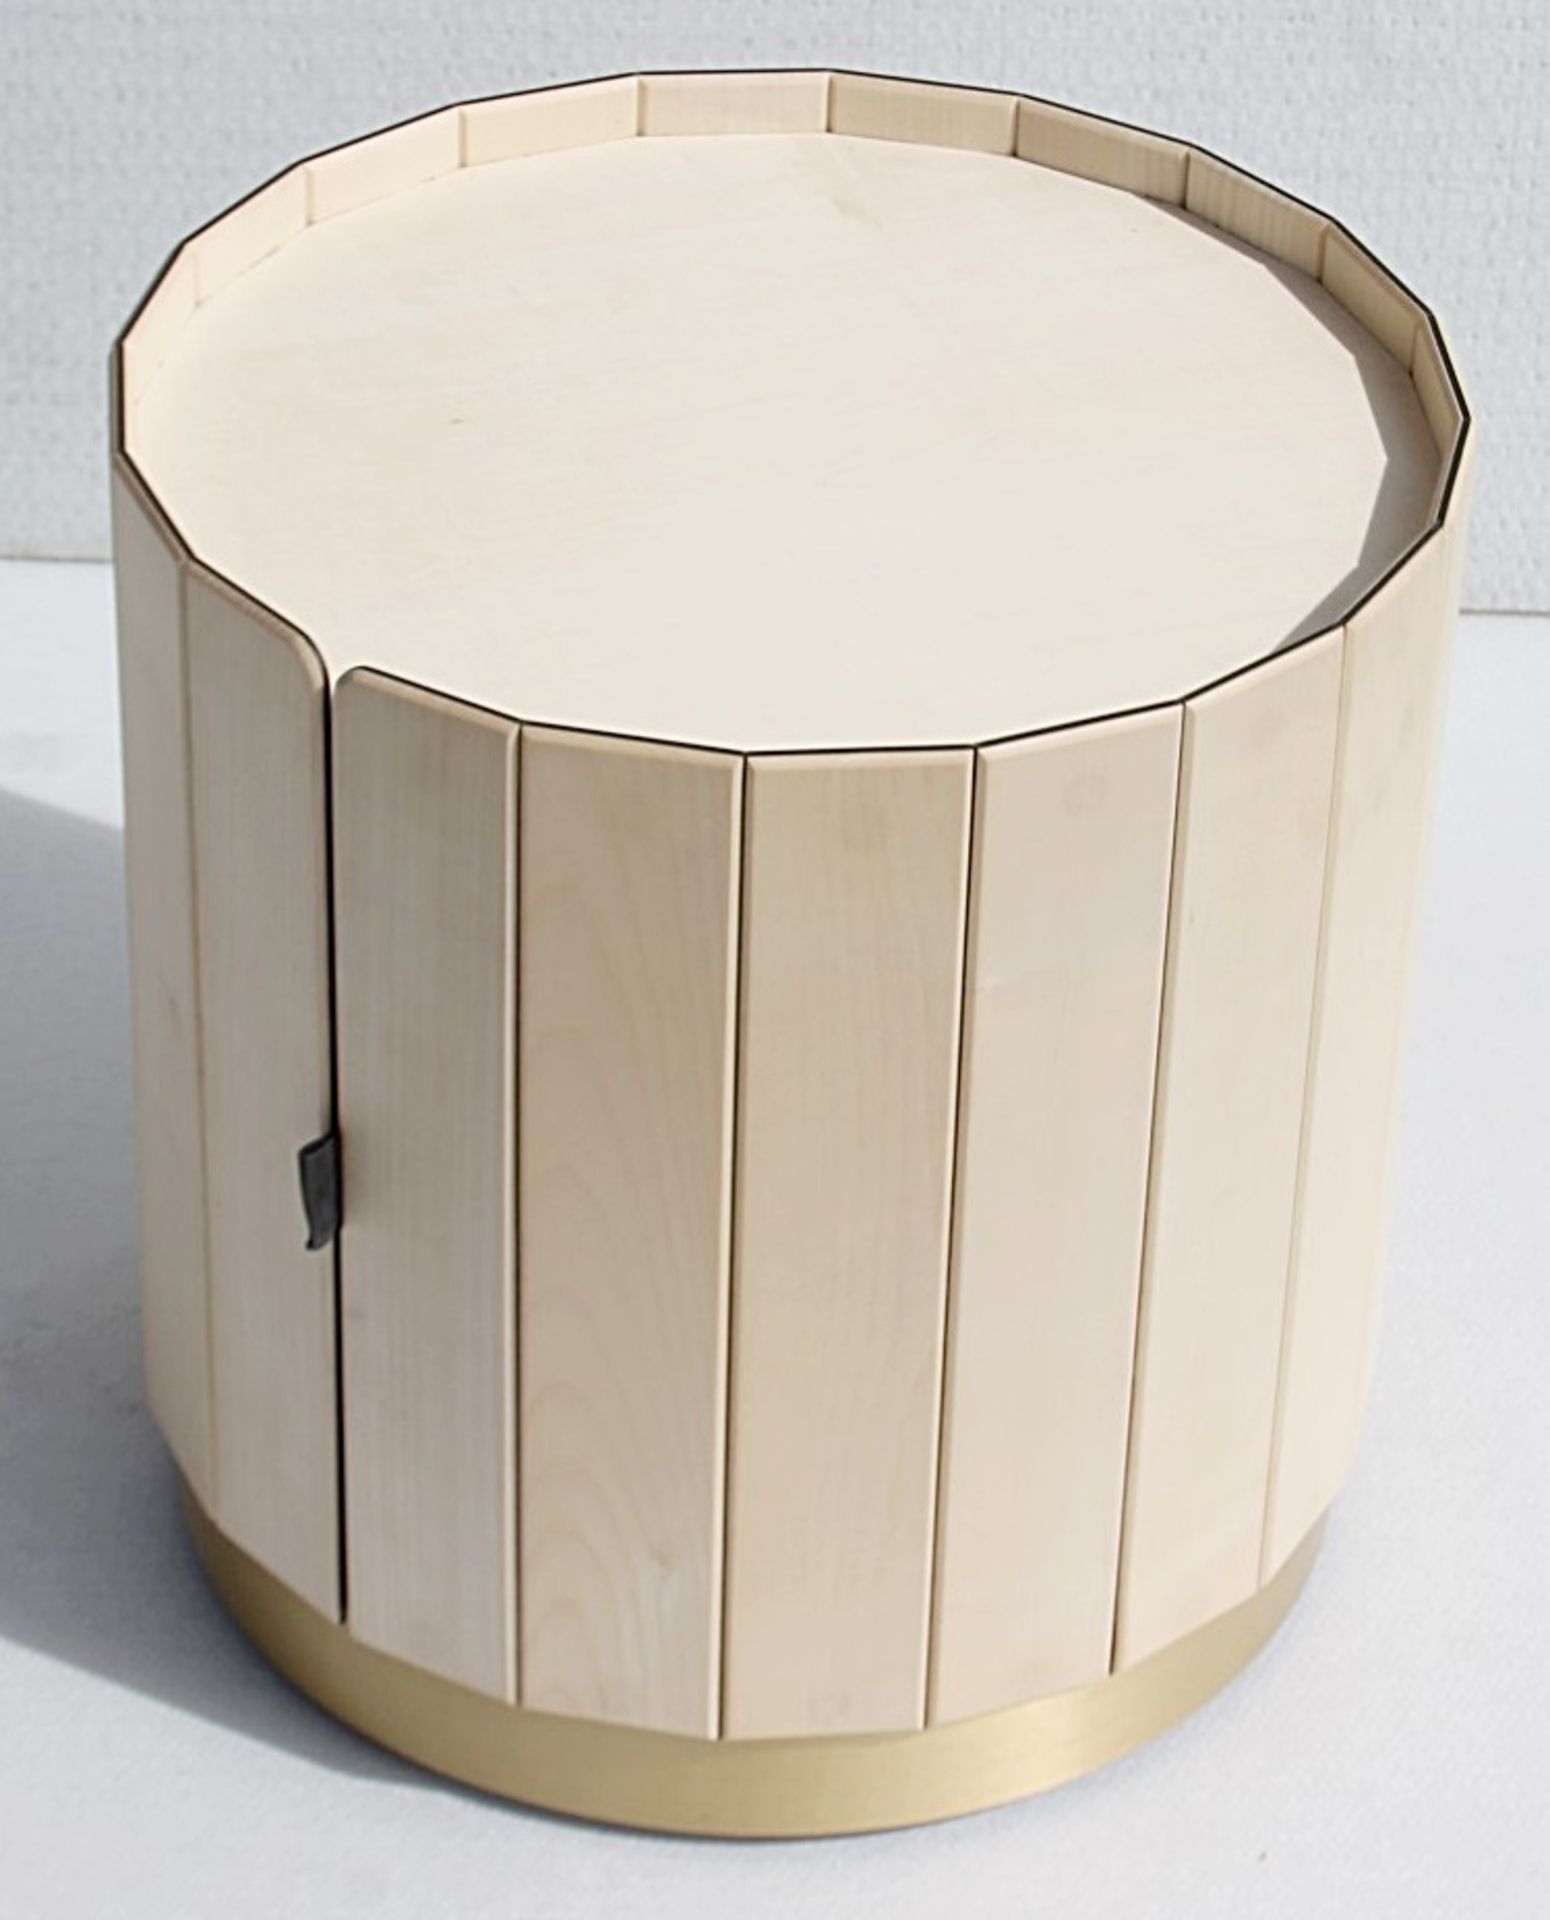 1 x BAXTER 'Ninfea' Italian Designer Solid Maple Bedside Table With Storage - Original Price £2,399 - Image 6 of 7